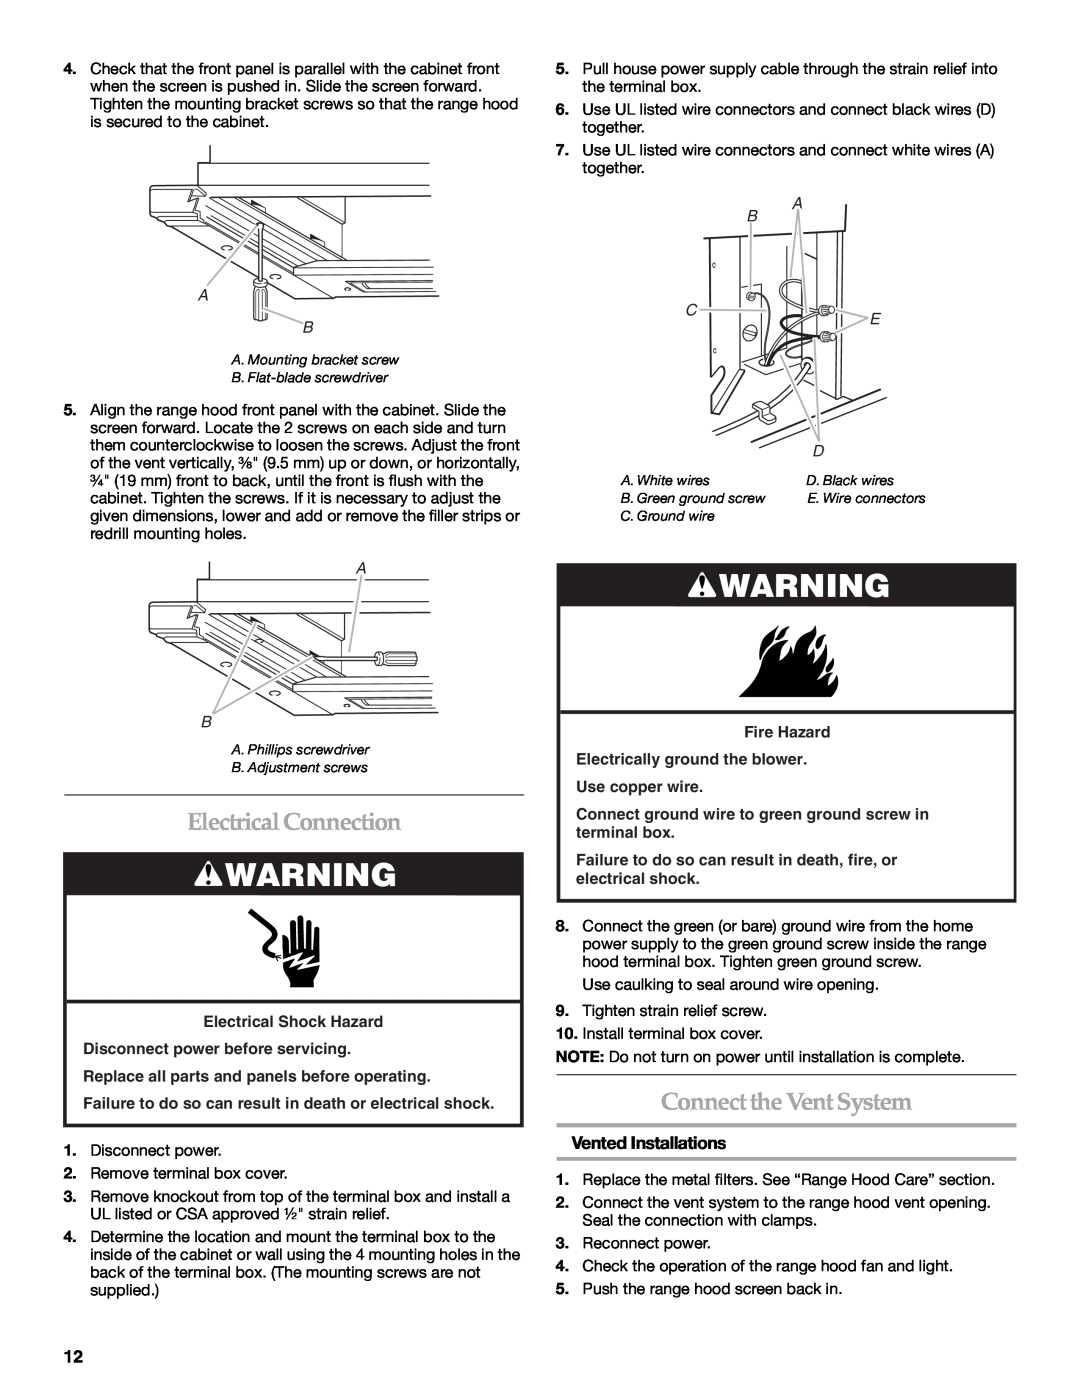 KitchenAid W10267109C installation instructions Electrical Connection, ConnecttheVentSystem, Vented Installations 